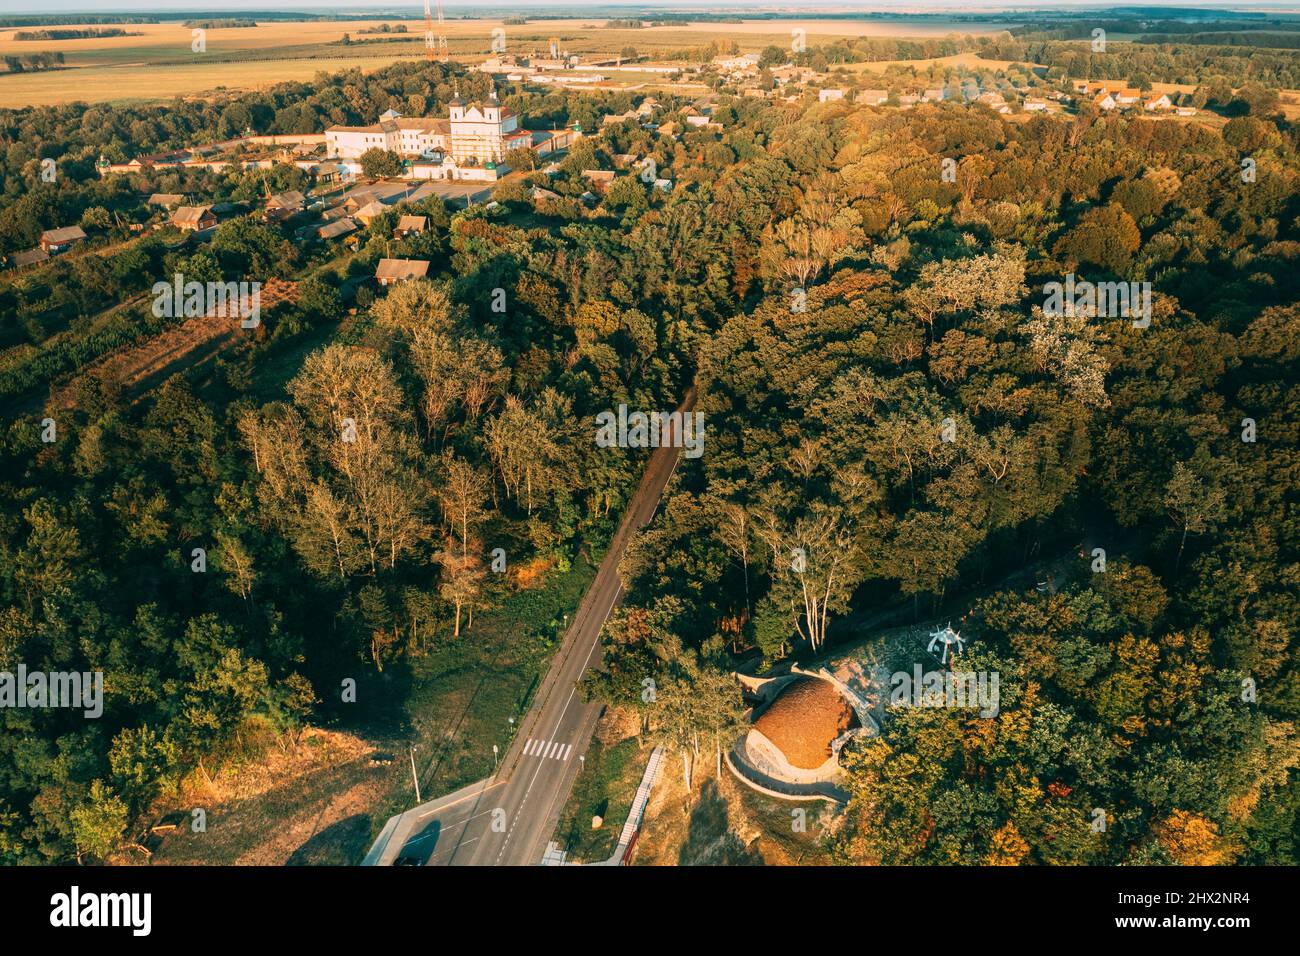 Aerial View Of Jesuit Collegium Complex. Top View Of Parking Lot Of Primitive Man Upper Period Of The Paleolithic 26 Thousand Years Ago. Drone View Stock Photo